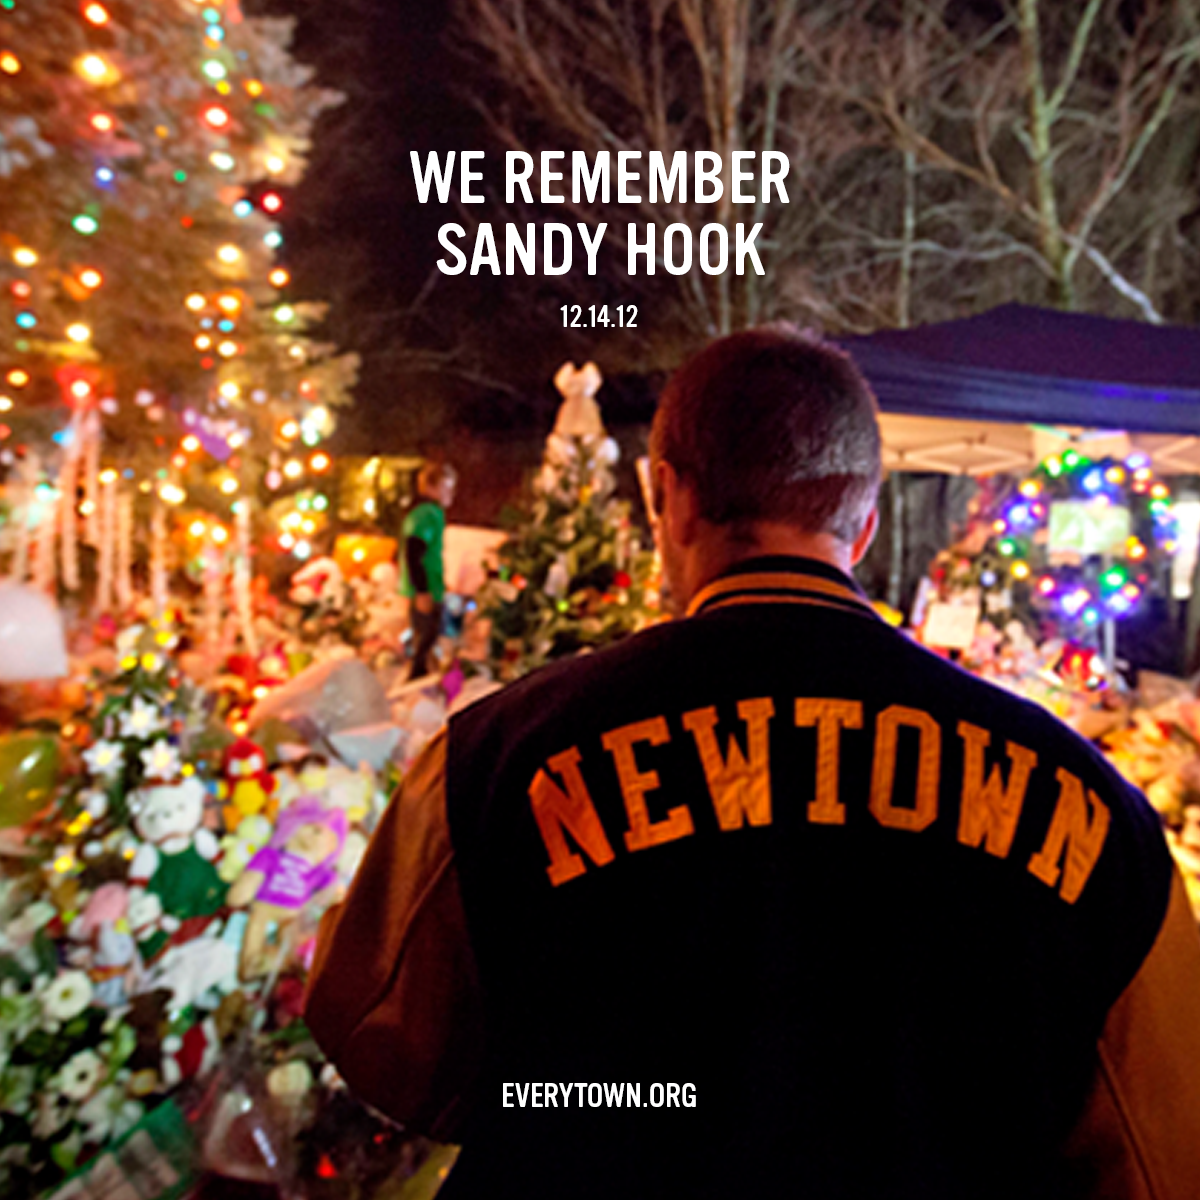 Seven years ago today, 20 children and six educators had their lives taken by a horrific act of gun violence at Sandy Hook School in Newtown, CT. ⁠
⁠
We hold the victims, survivors, and Newtown community in our hearts as we all work together to end...